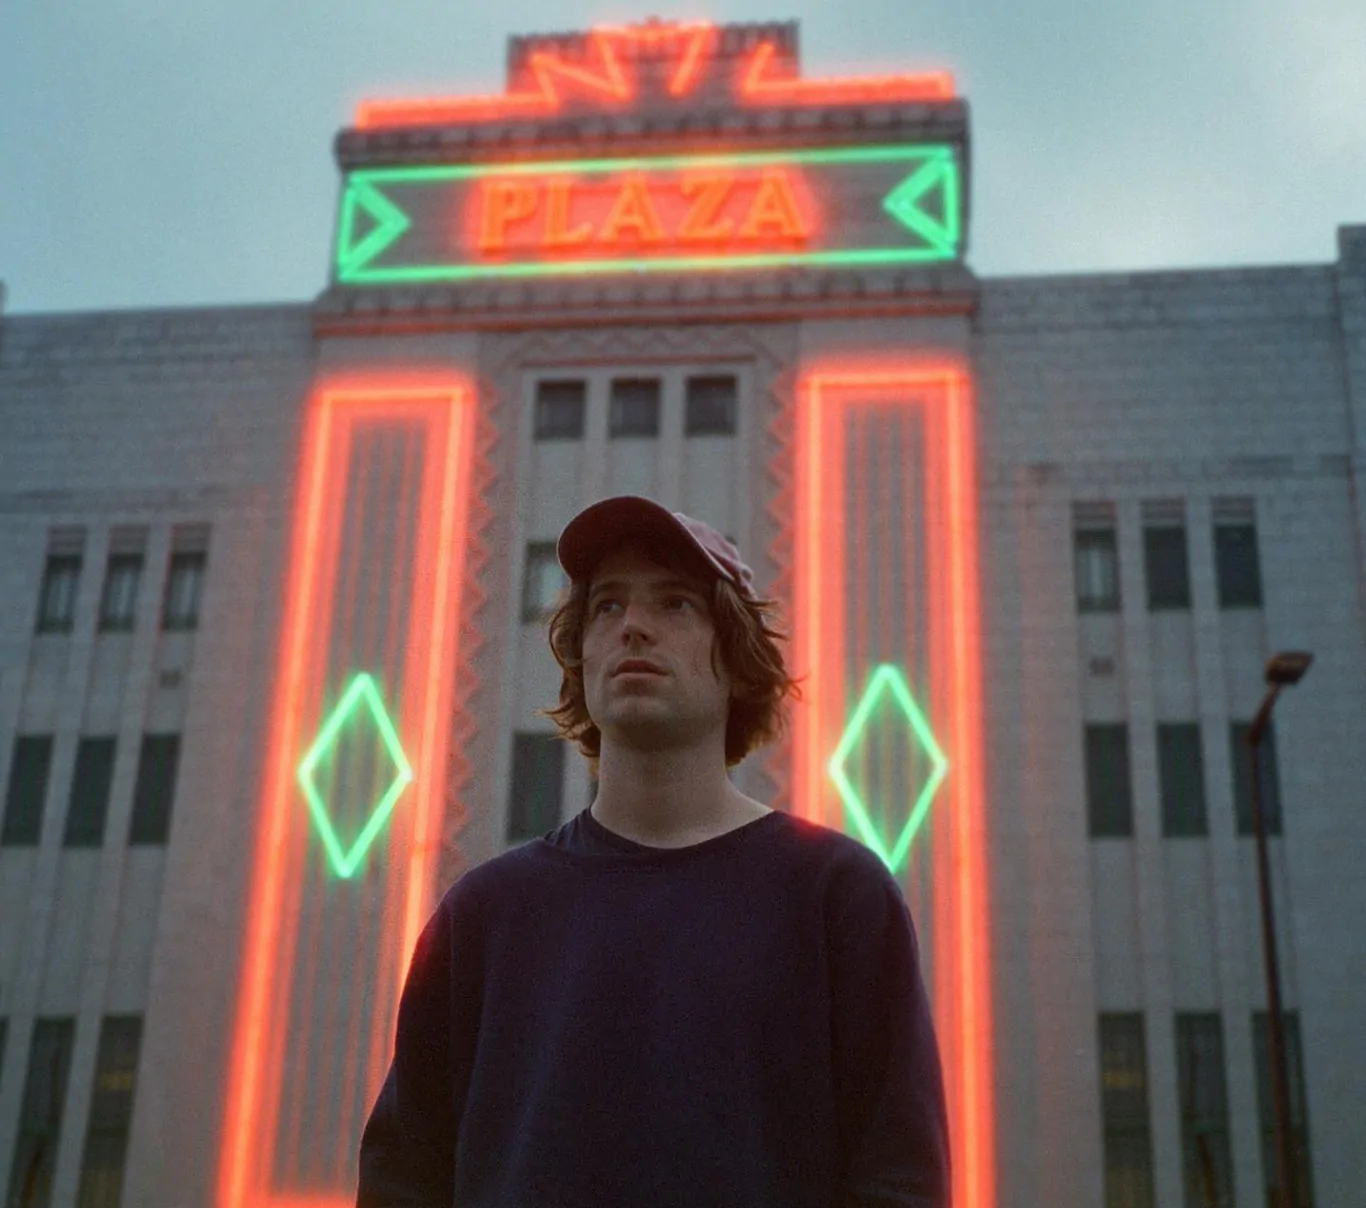 INTERVIEW: Thom Southern on his debut solo album PLAZA